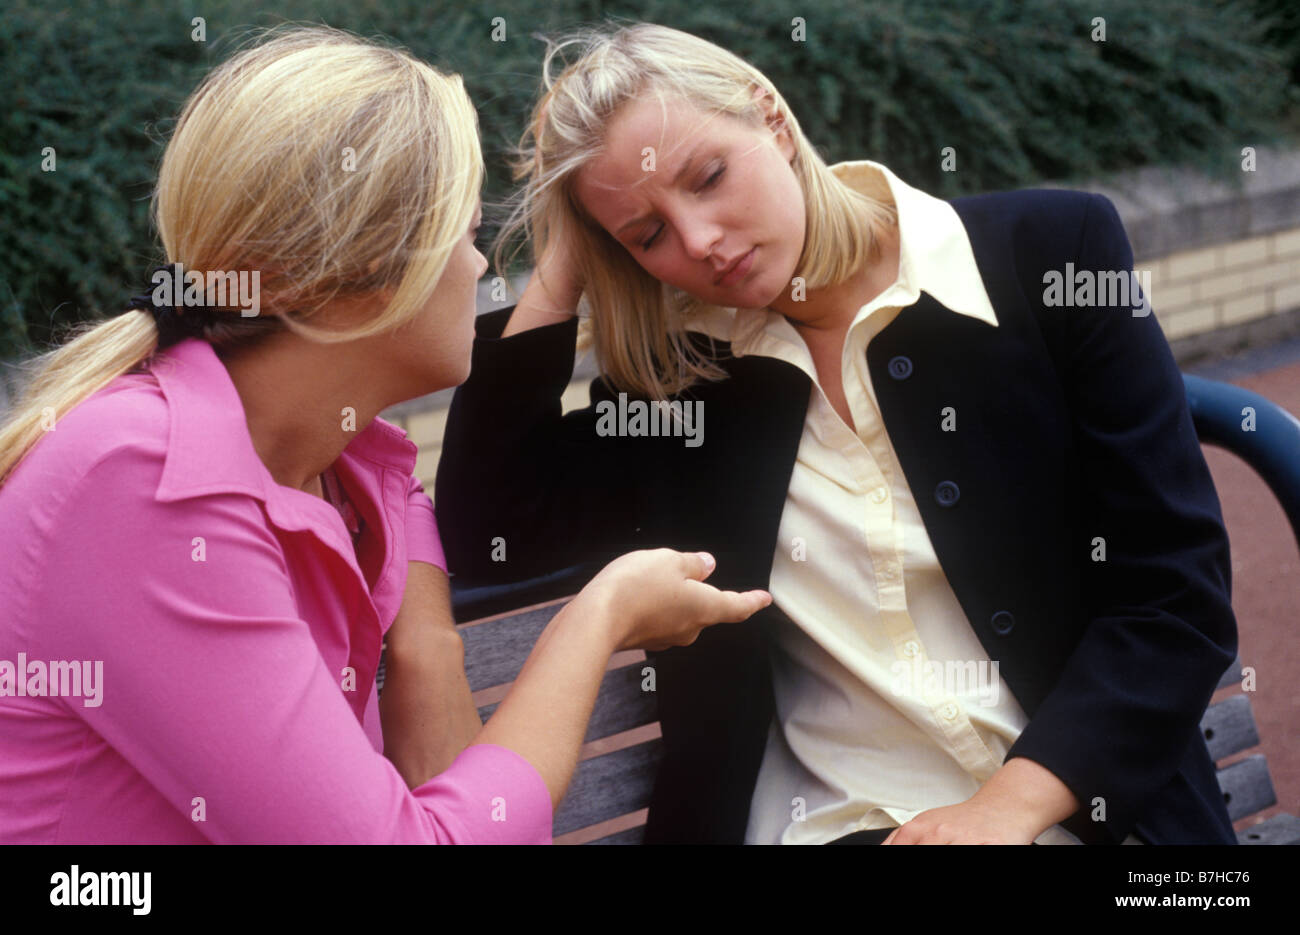 two young women talking seriously Stock Photo